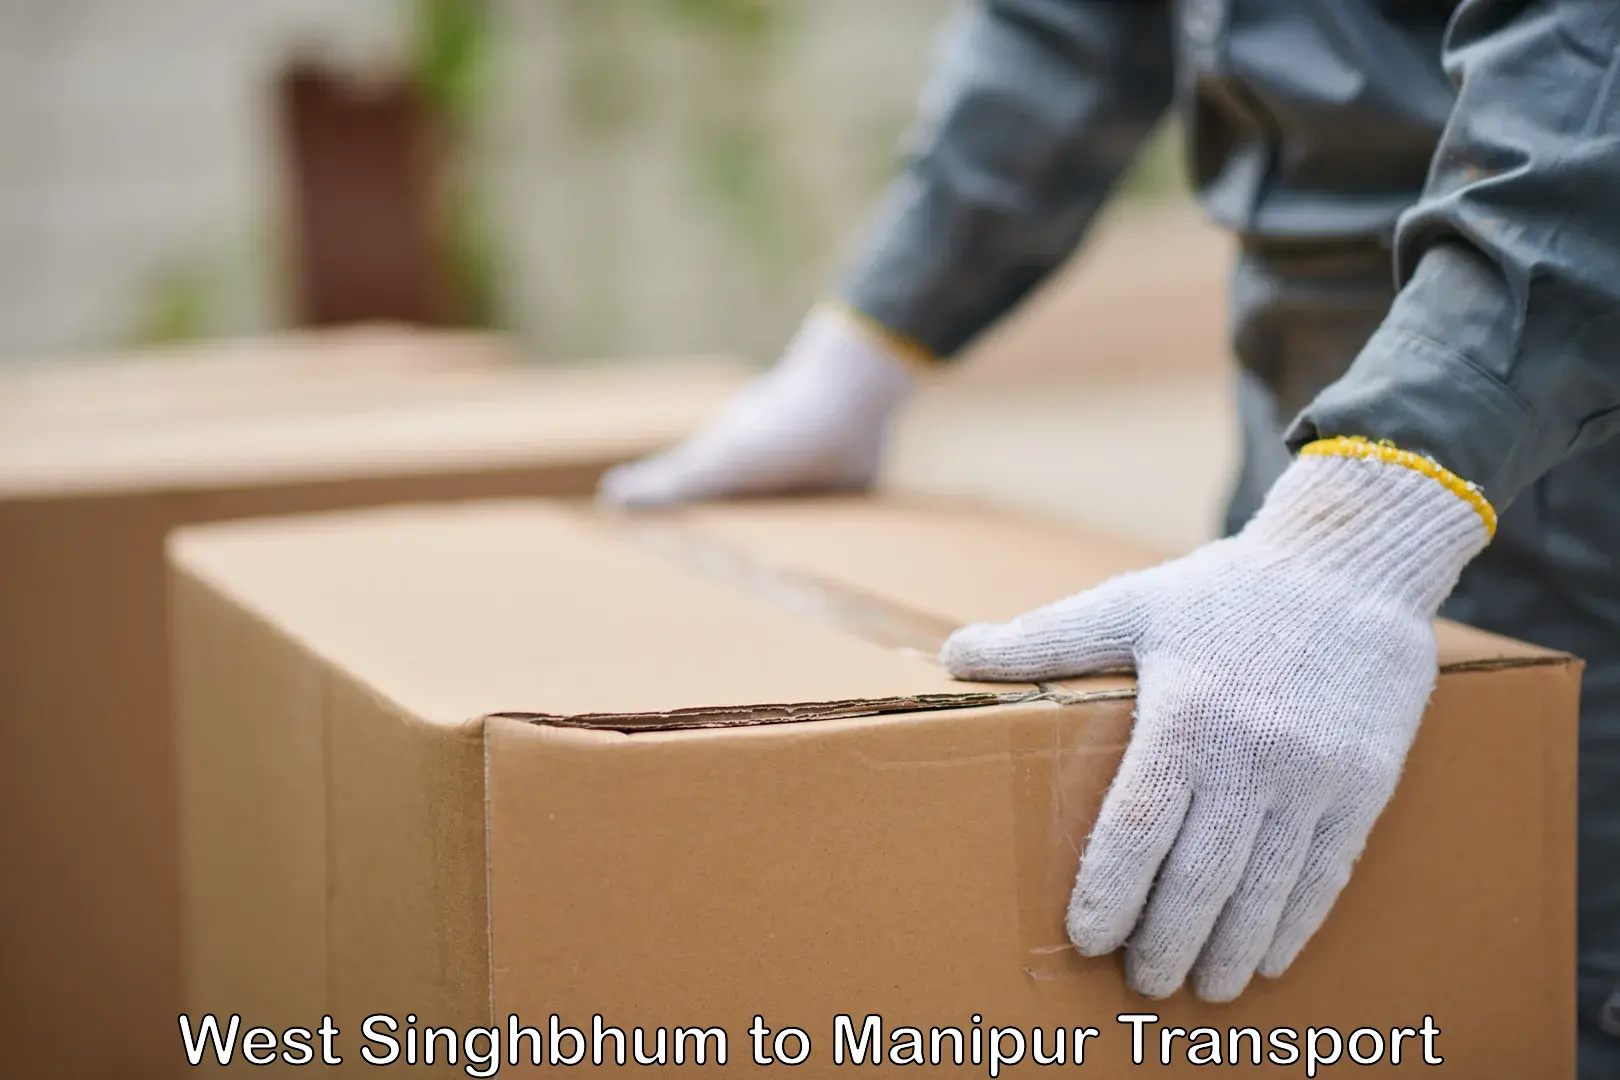 Nationwide transport services West Singhbhum to Manipur